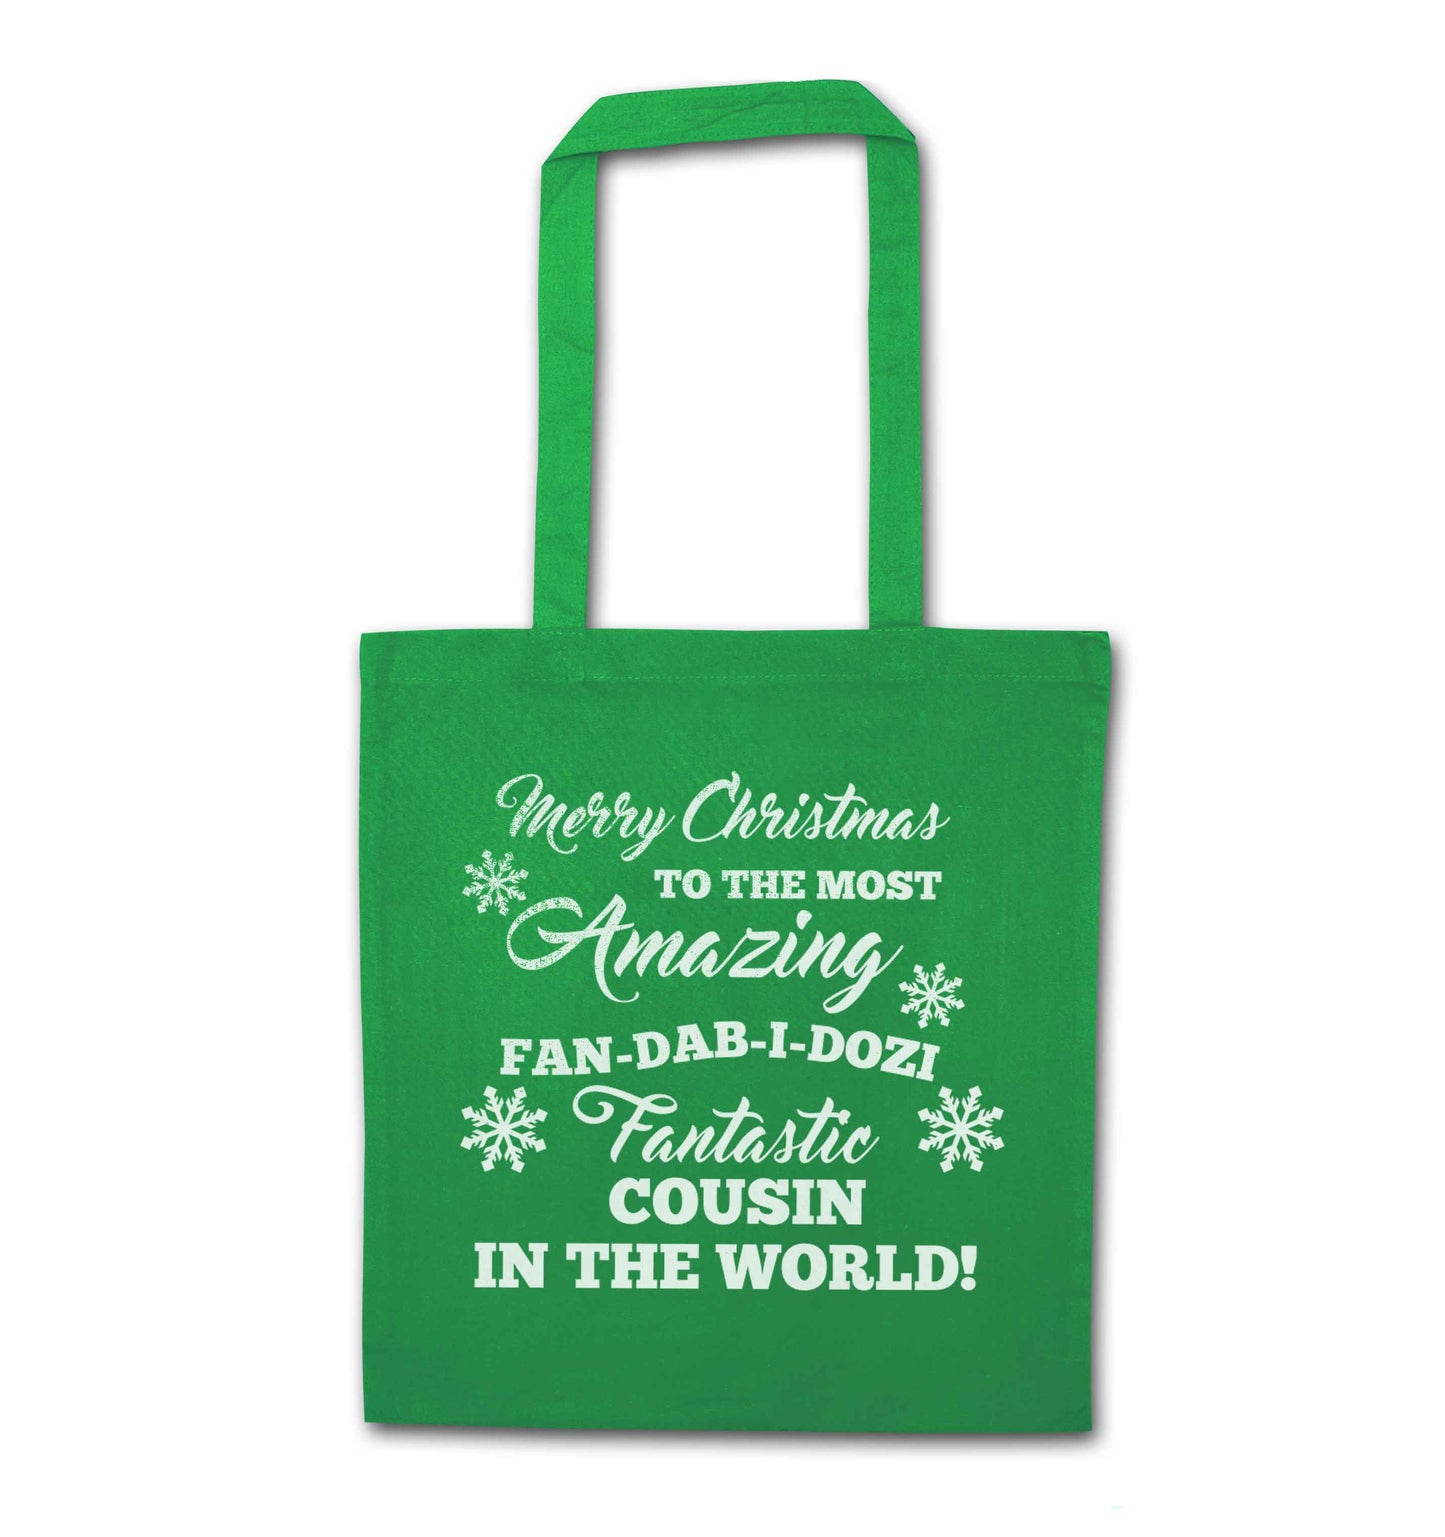 Merry Christmas to the most amazing fan-dab-i-dozi fantasic Cousin in the world green tote bag